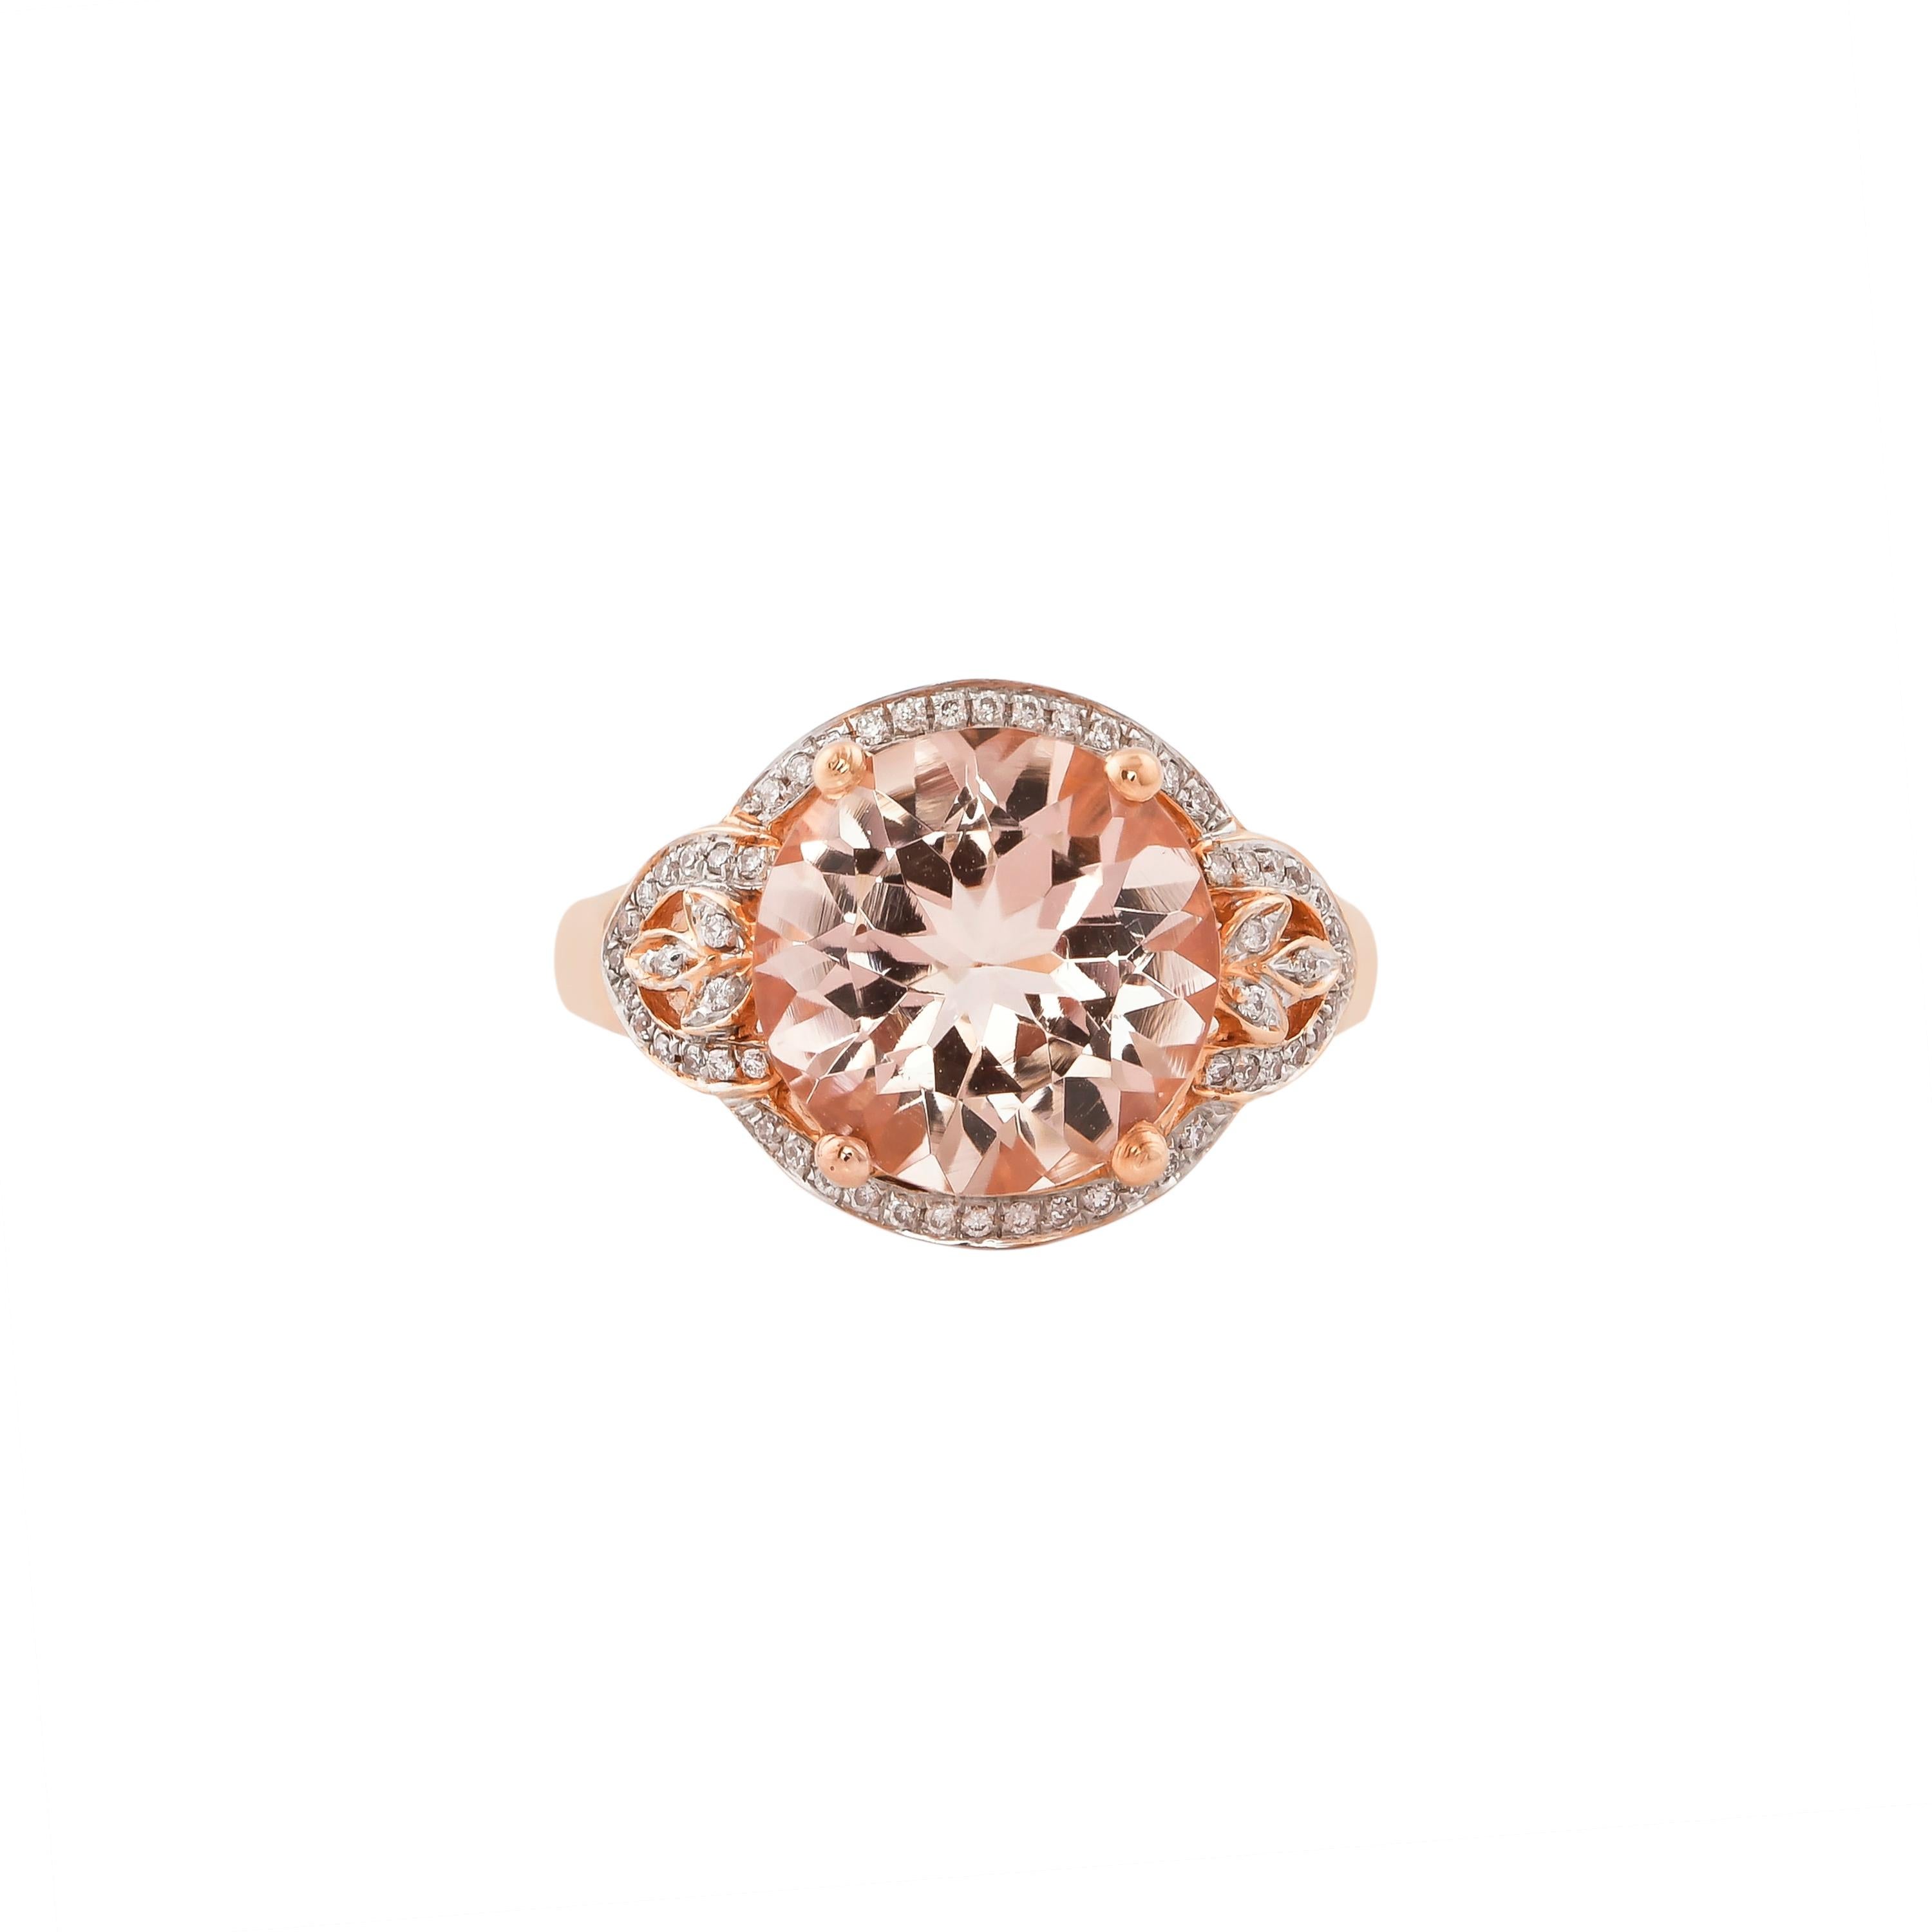 Contemporary 4.02 Carat Morganite and Diamond Ring in 18 Karat Rose Gold For Sale